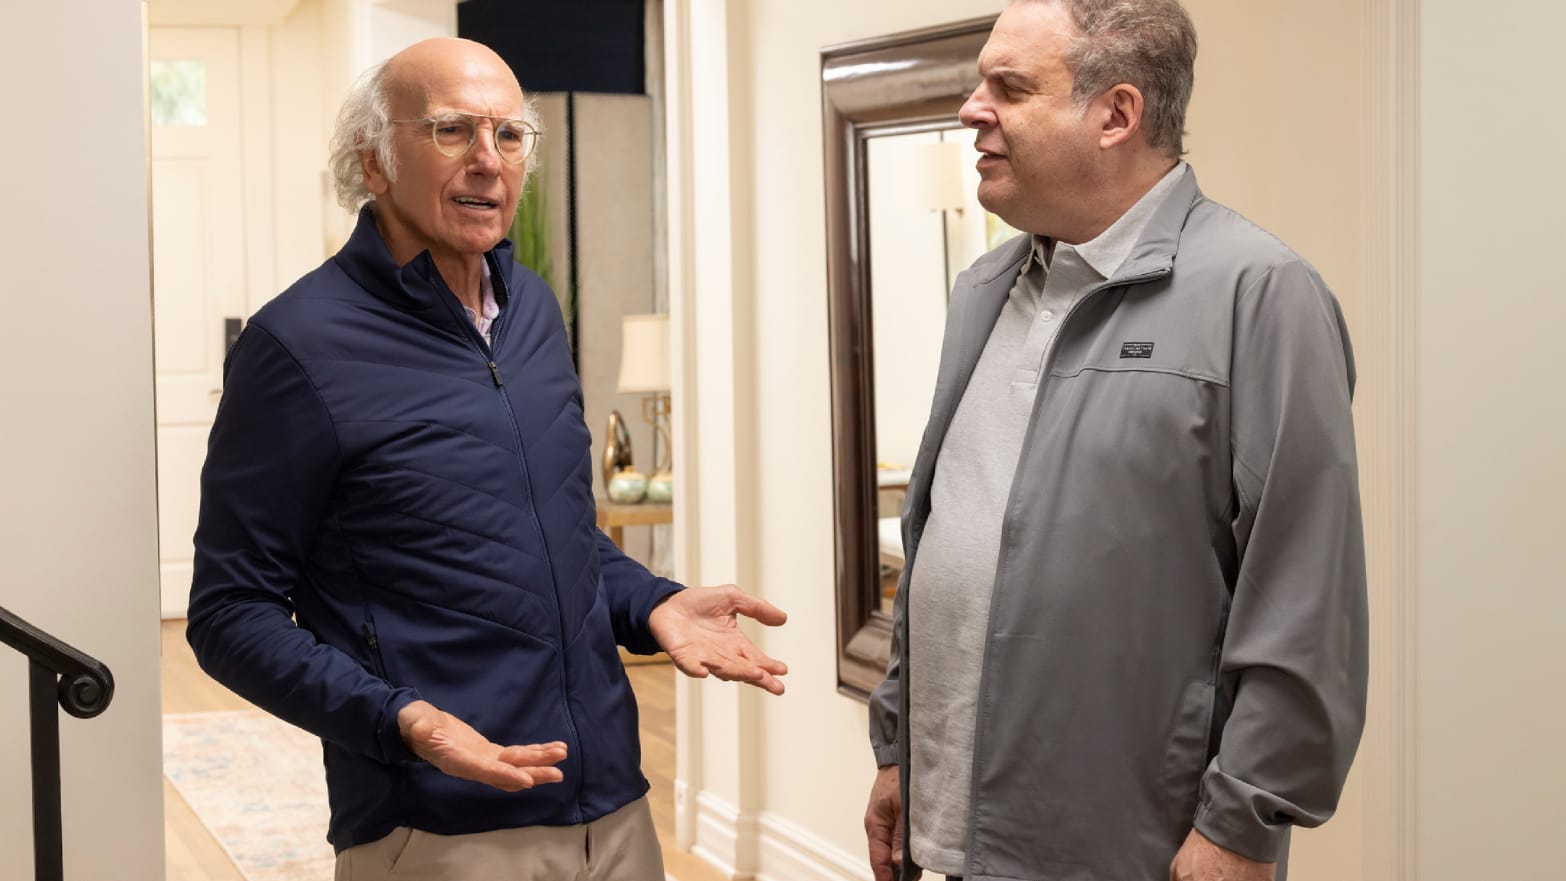 Photo still of Larry David and Jeff Garlin in “Curb Your Enthusiasm.”